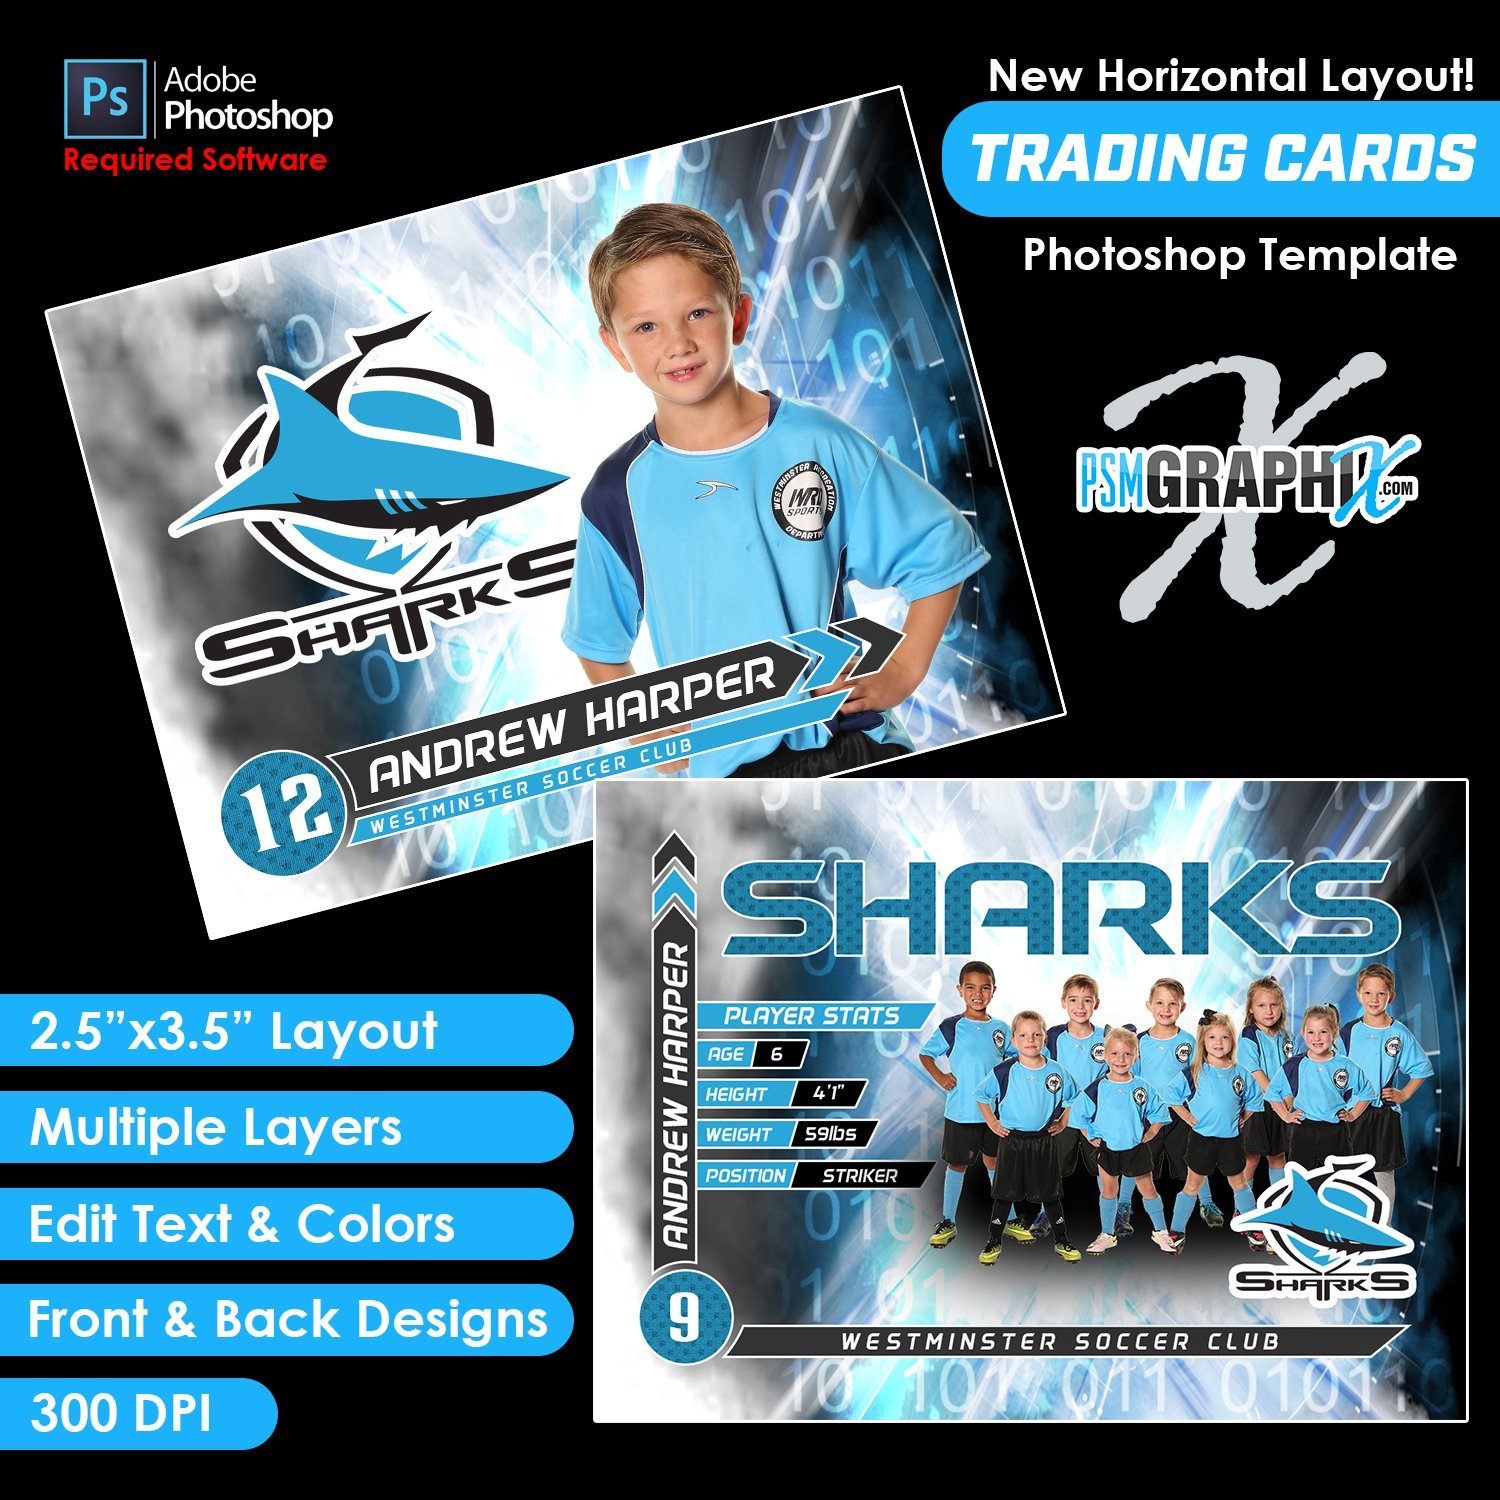 Time Zone - V5 - Game Day Trading Card Template-Photoshop Template - PSMGraphix